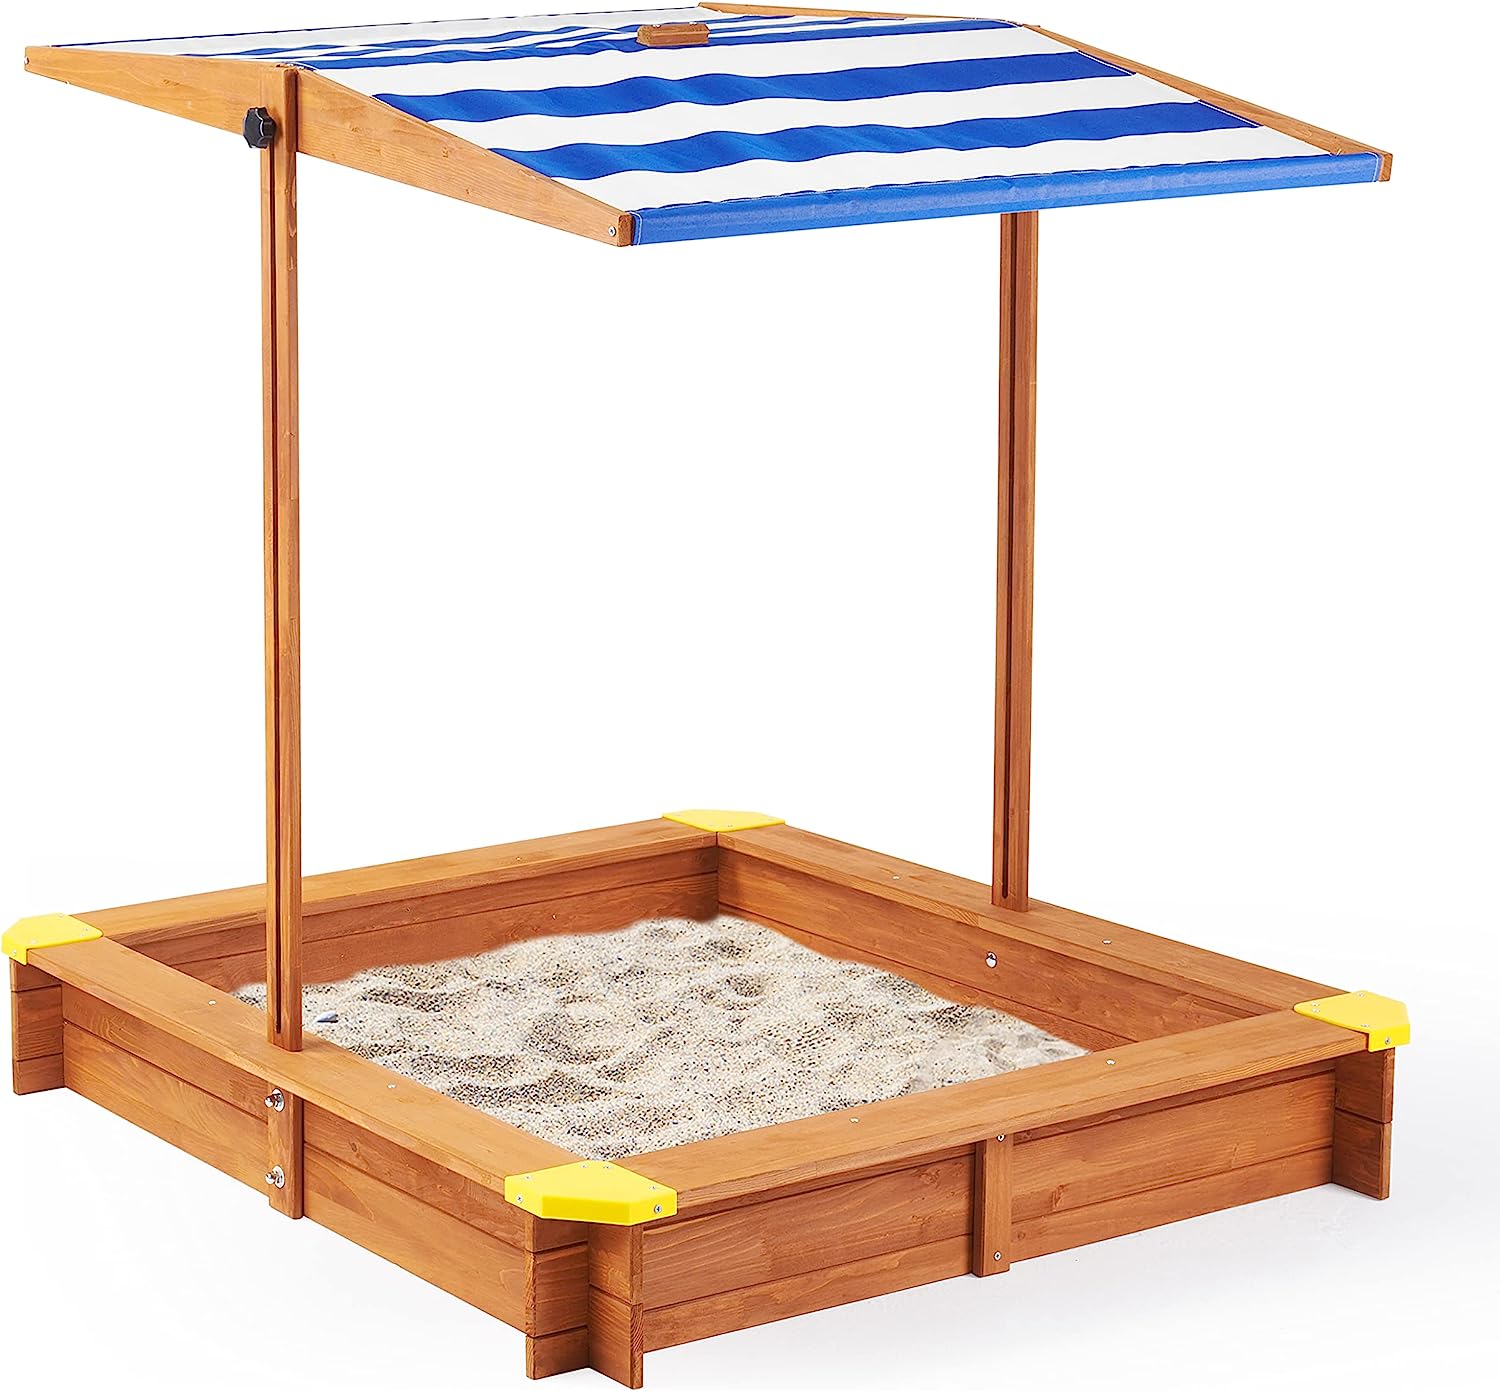 Kid's Sandbox with Cover, 46''x46'' Outdoor Wooden [...]